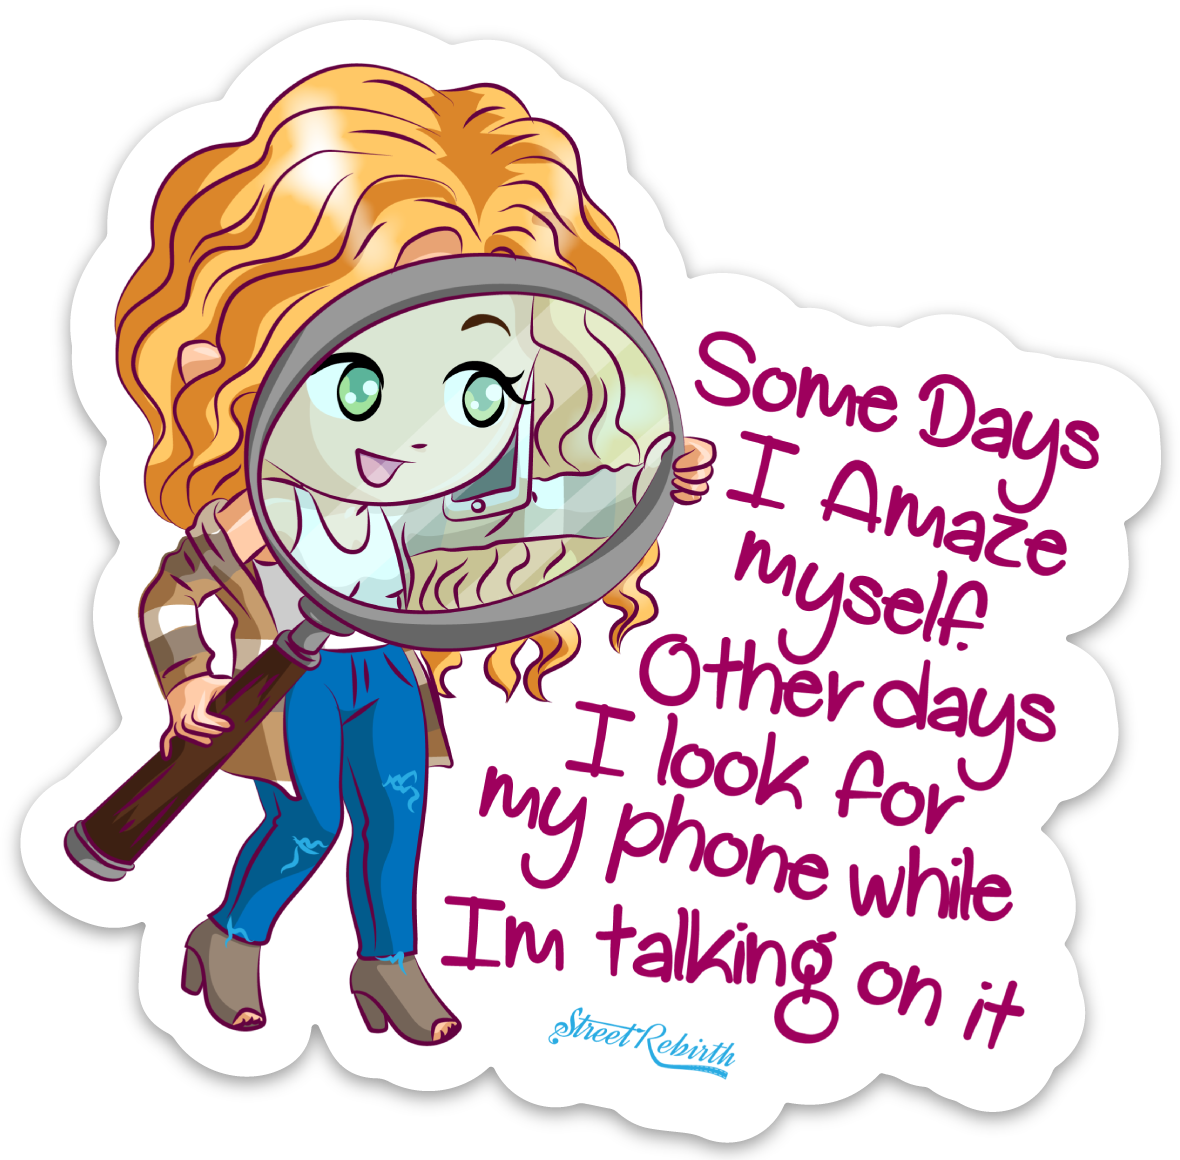 Some Days I amaze Myself PUN STICKER – ONE 4 INCH WATER PROOF VINYL STICKER – FOR HYDRO FLASK, SKATEBOARD, LAPTOP, PLANNER, CAR, COLLECTING, GIFTING